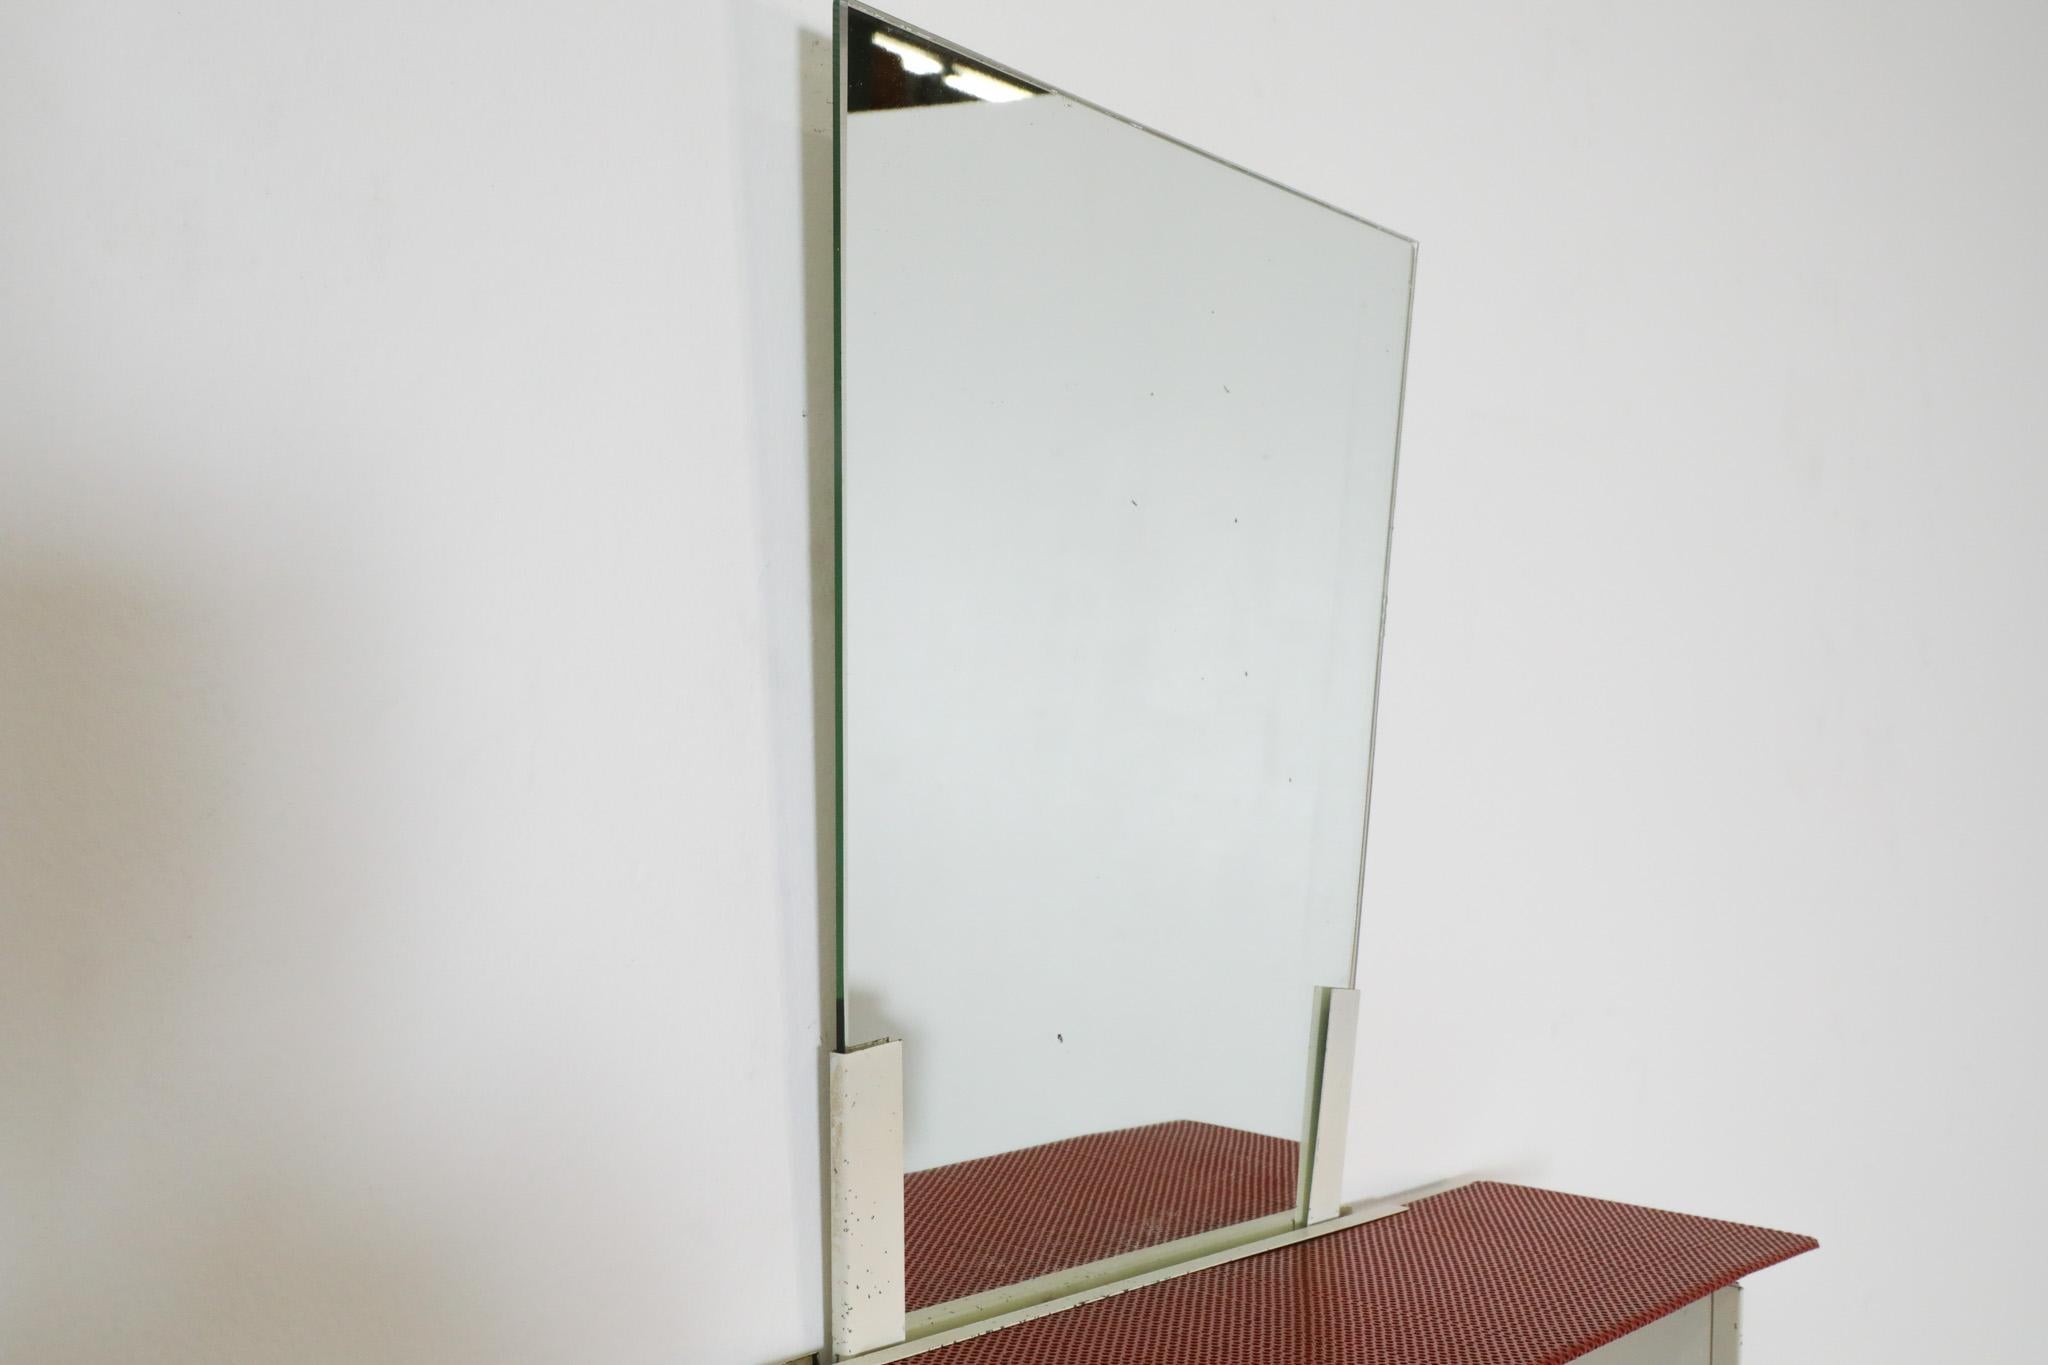 Mid-20th Century Mategot Style Wall Mirror with Red Metal Perforated Shelf & White Frame, 1950's